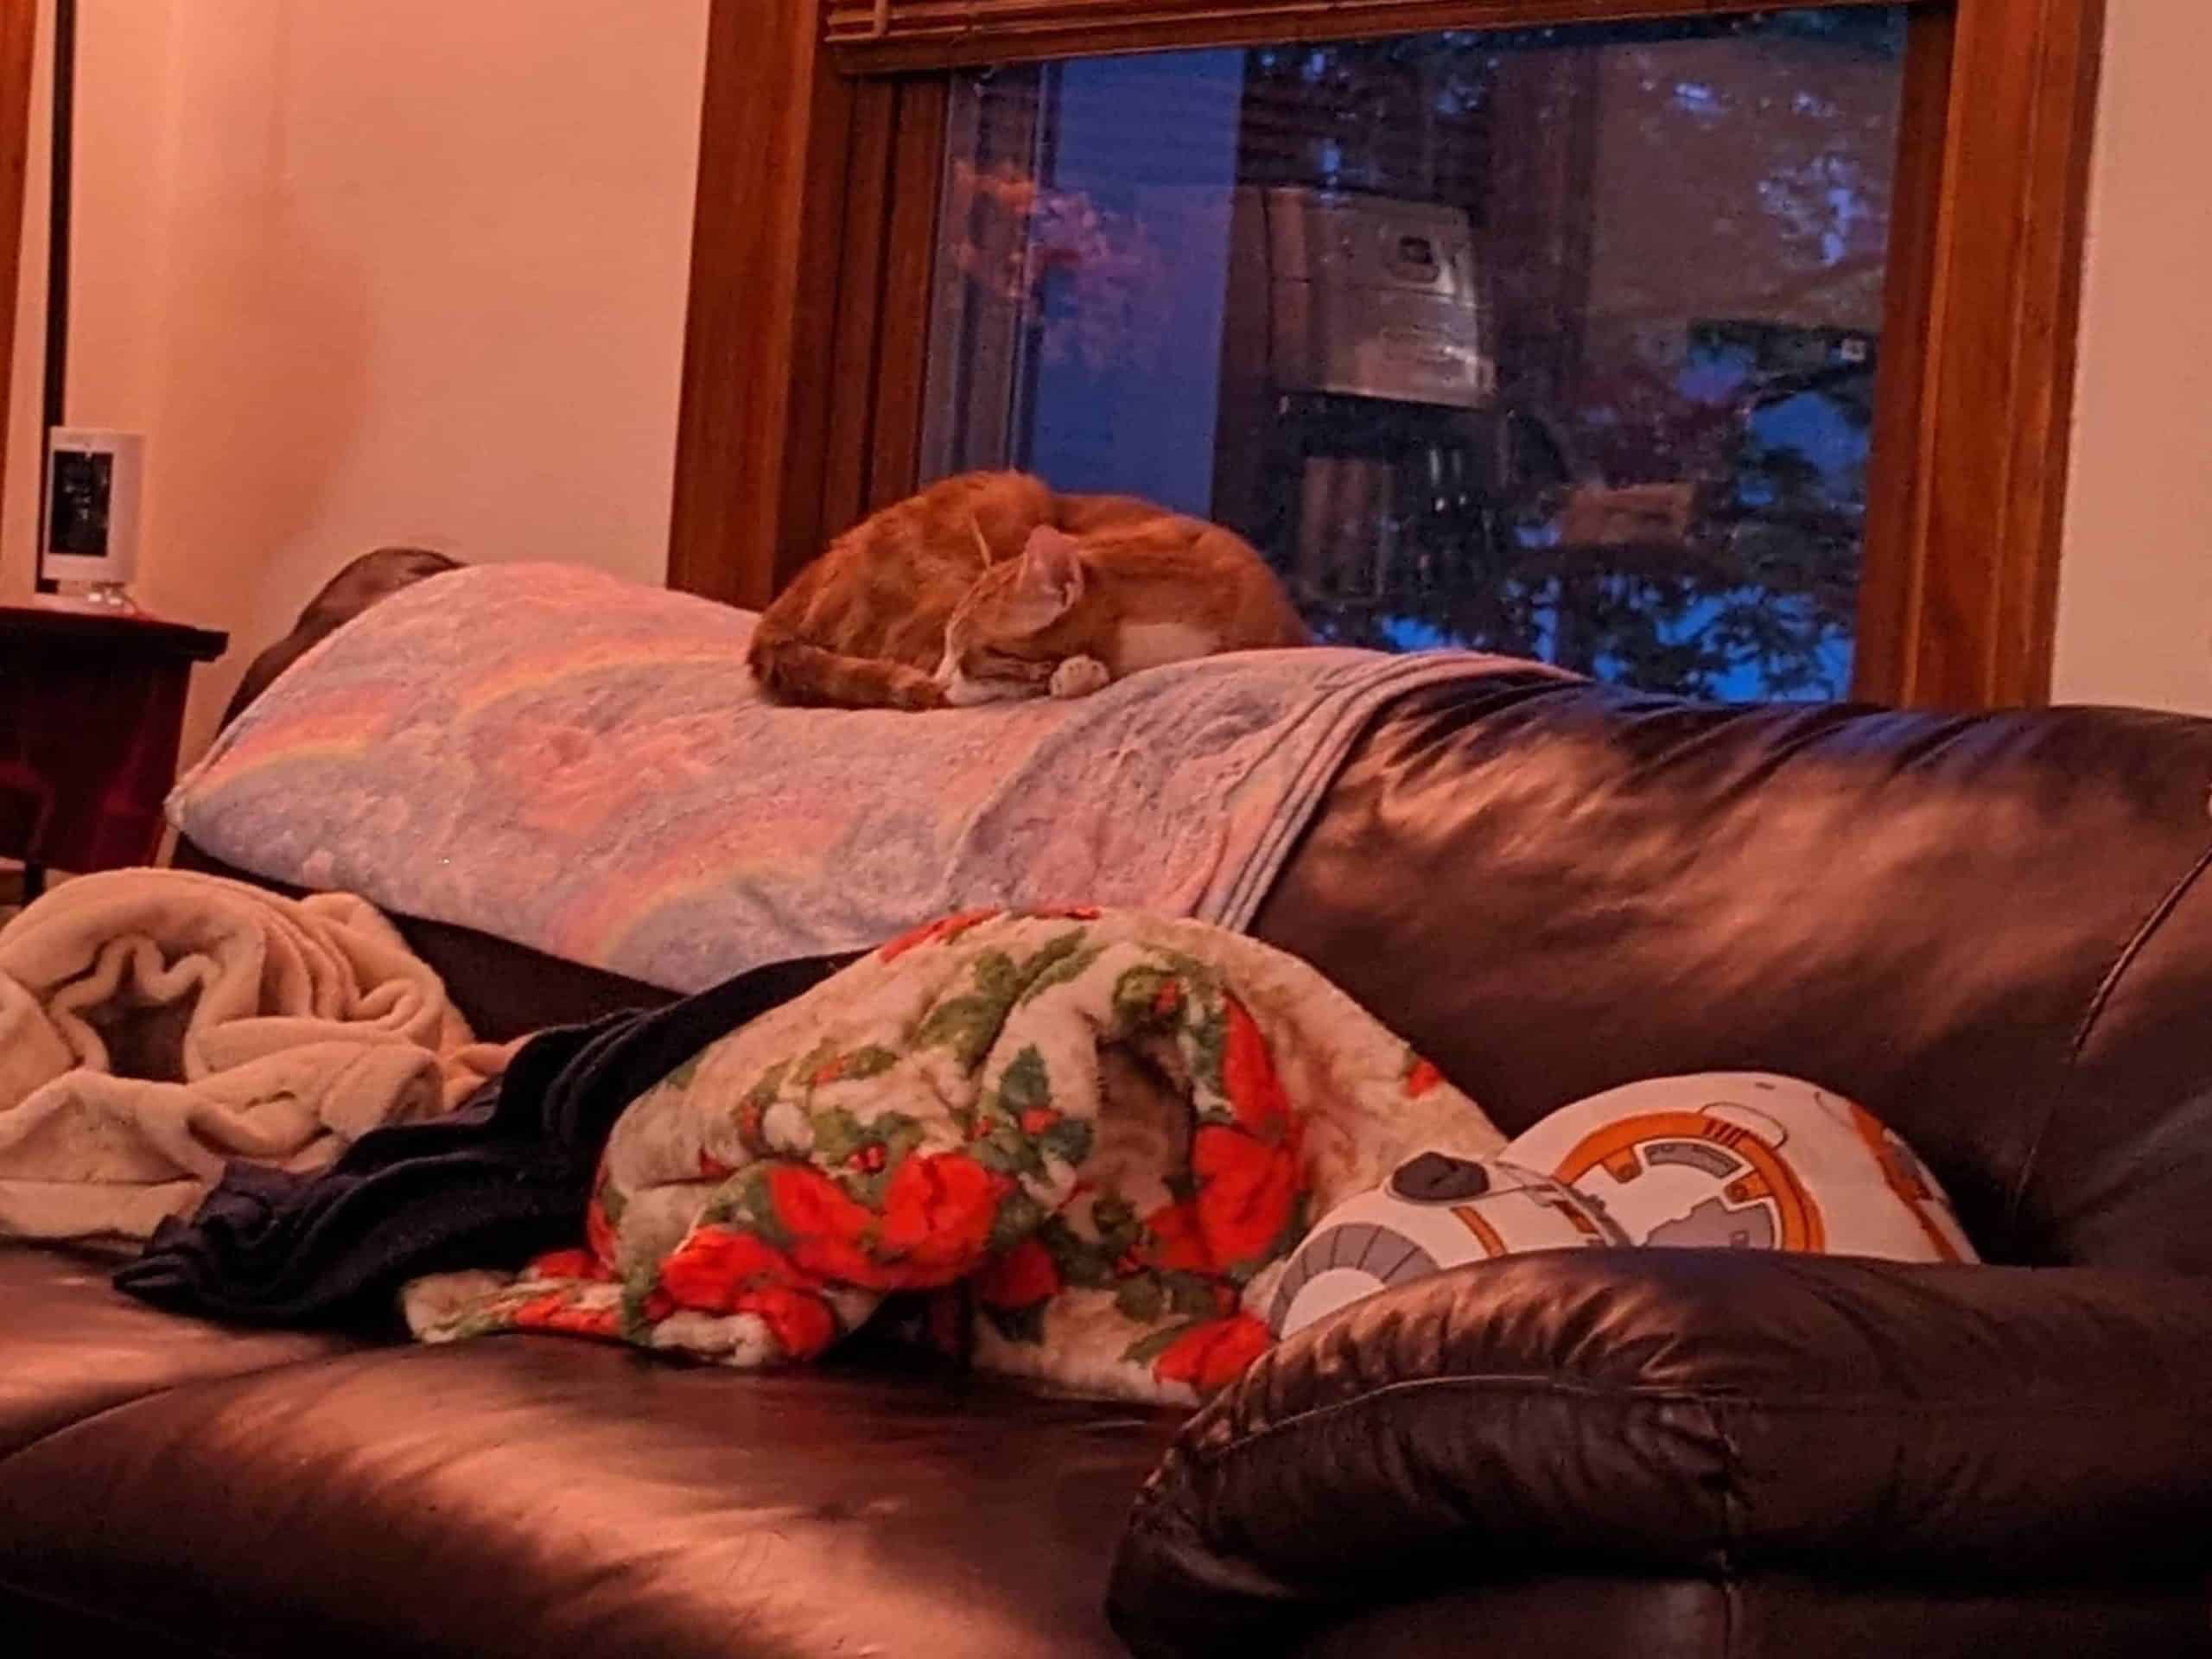 Orange cat napping on the back of a couch by a window